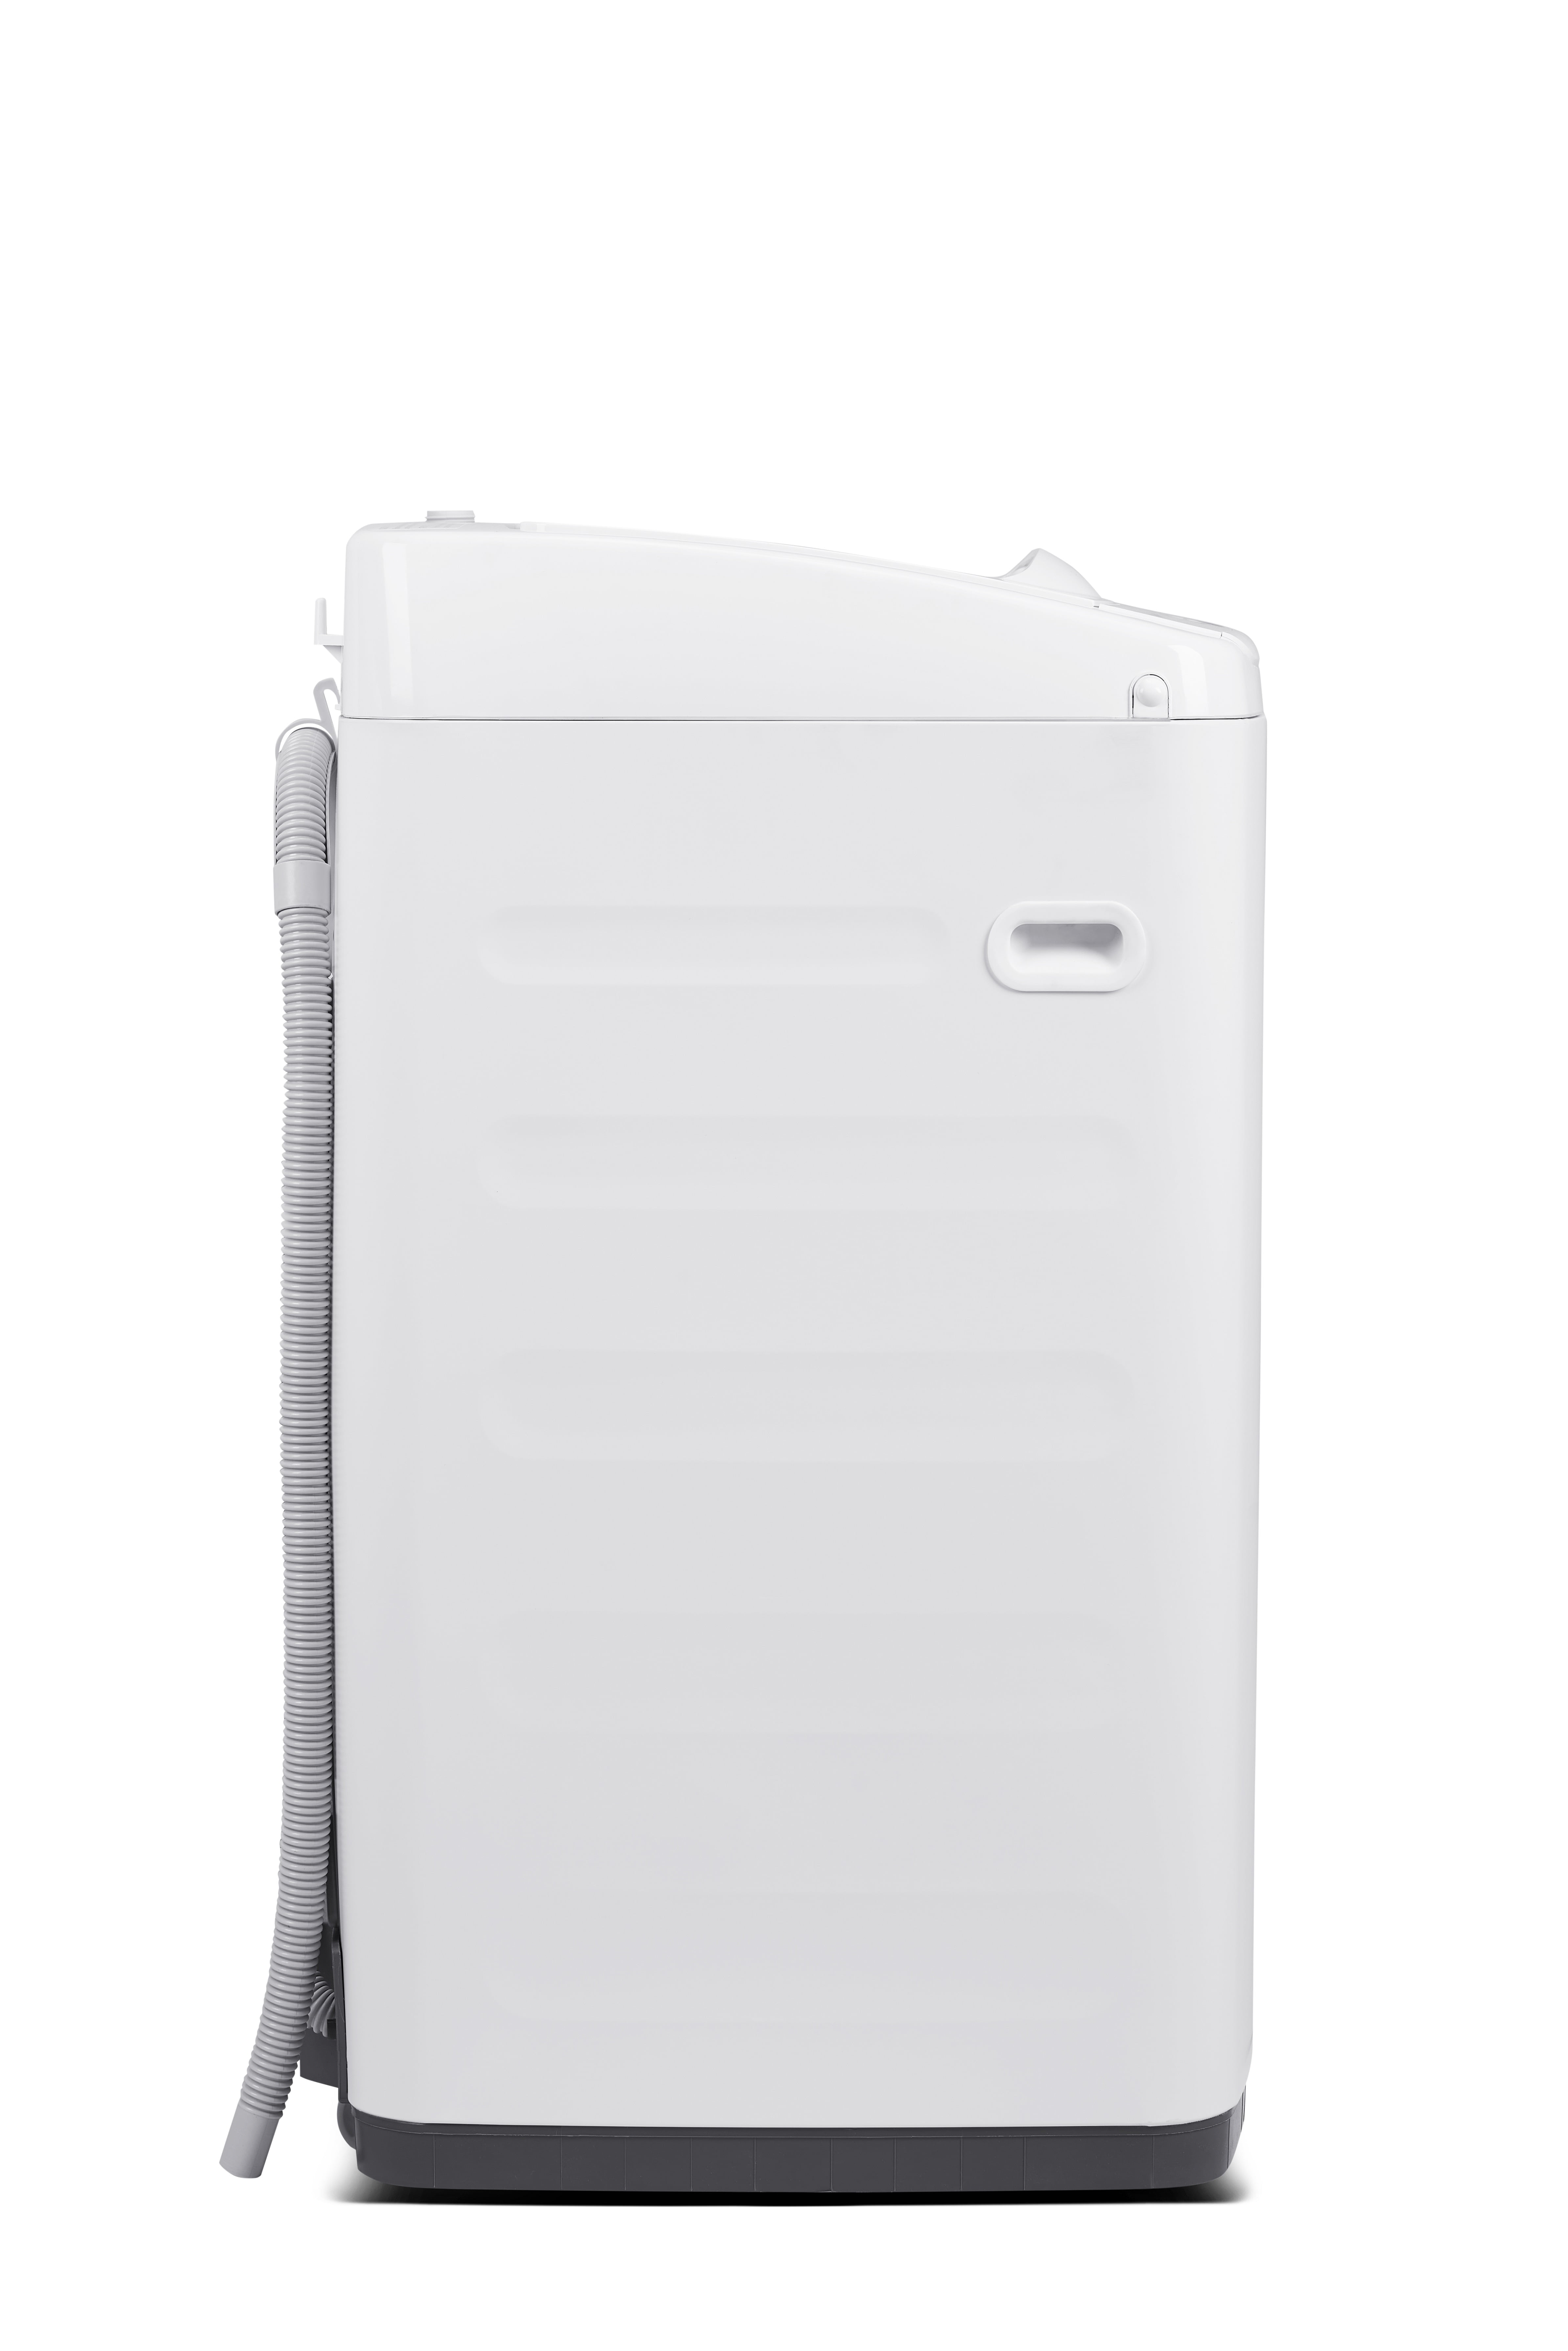 Magic Chef 0.9 cu. ft. Compact Portable Top Load Washer in White